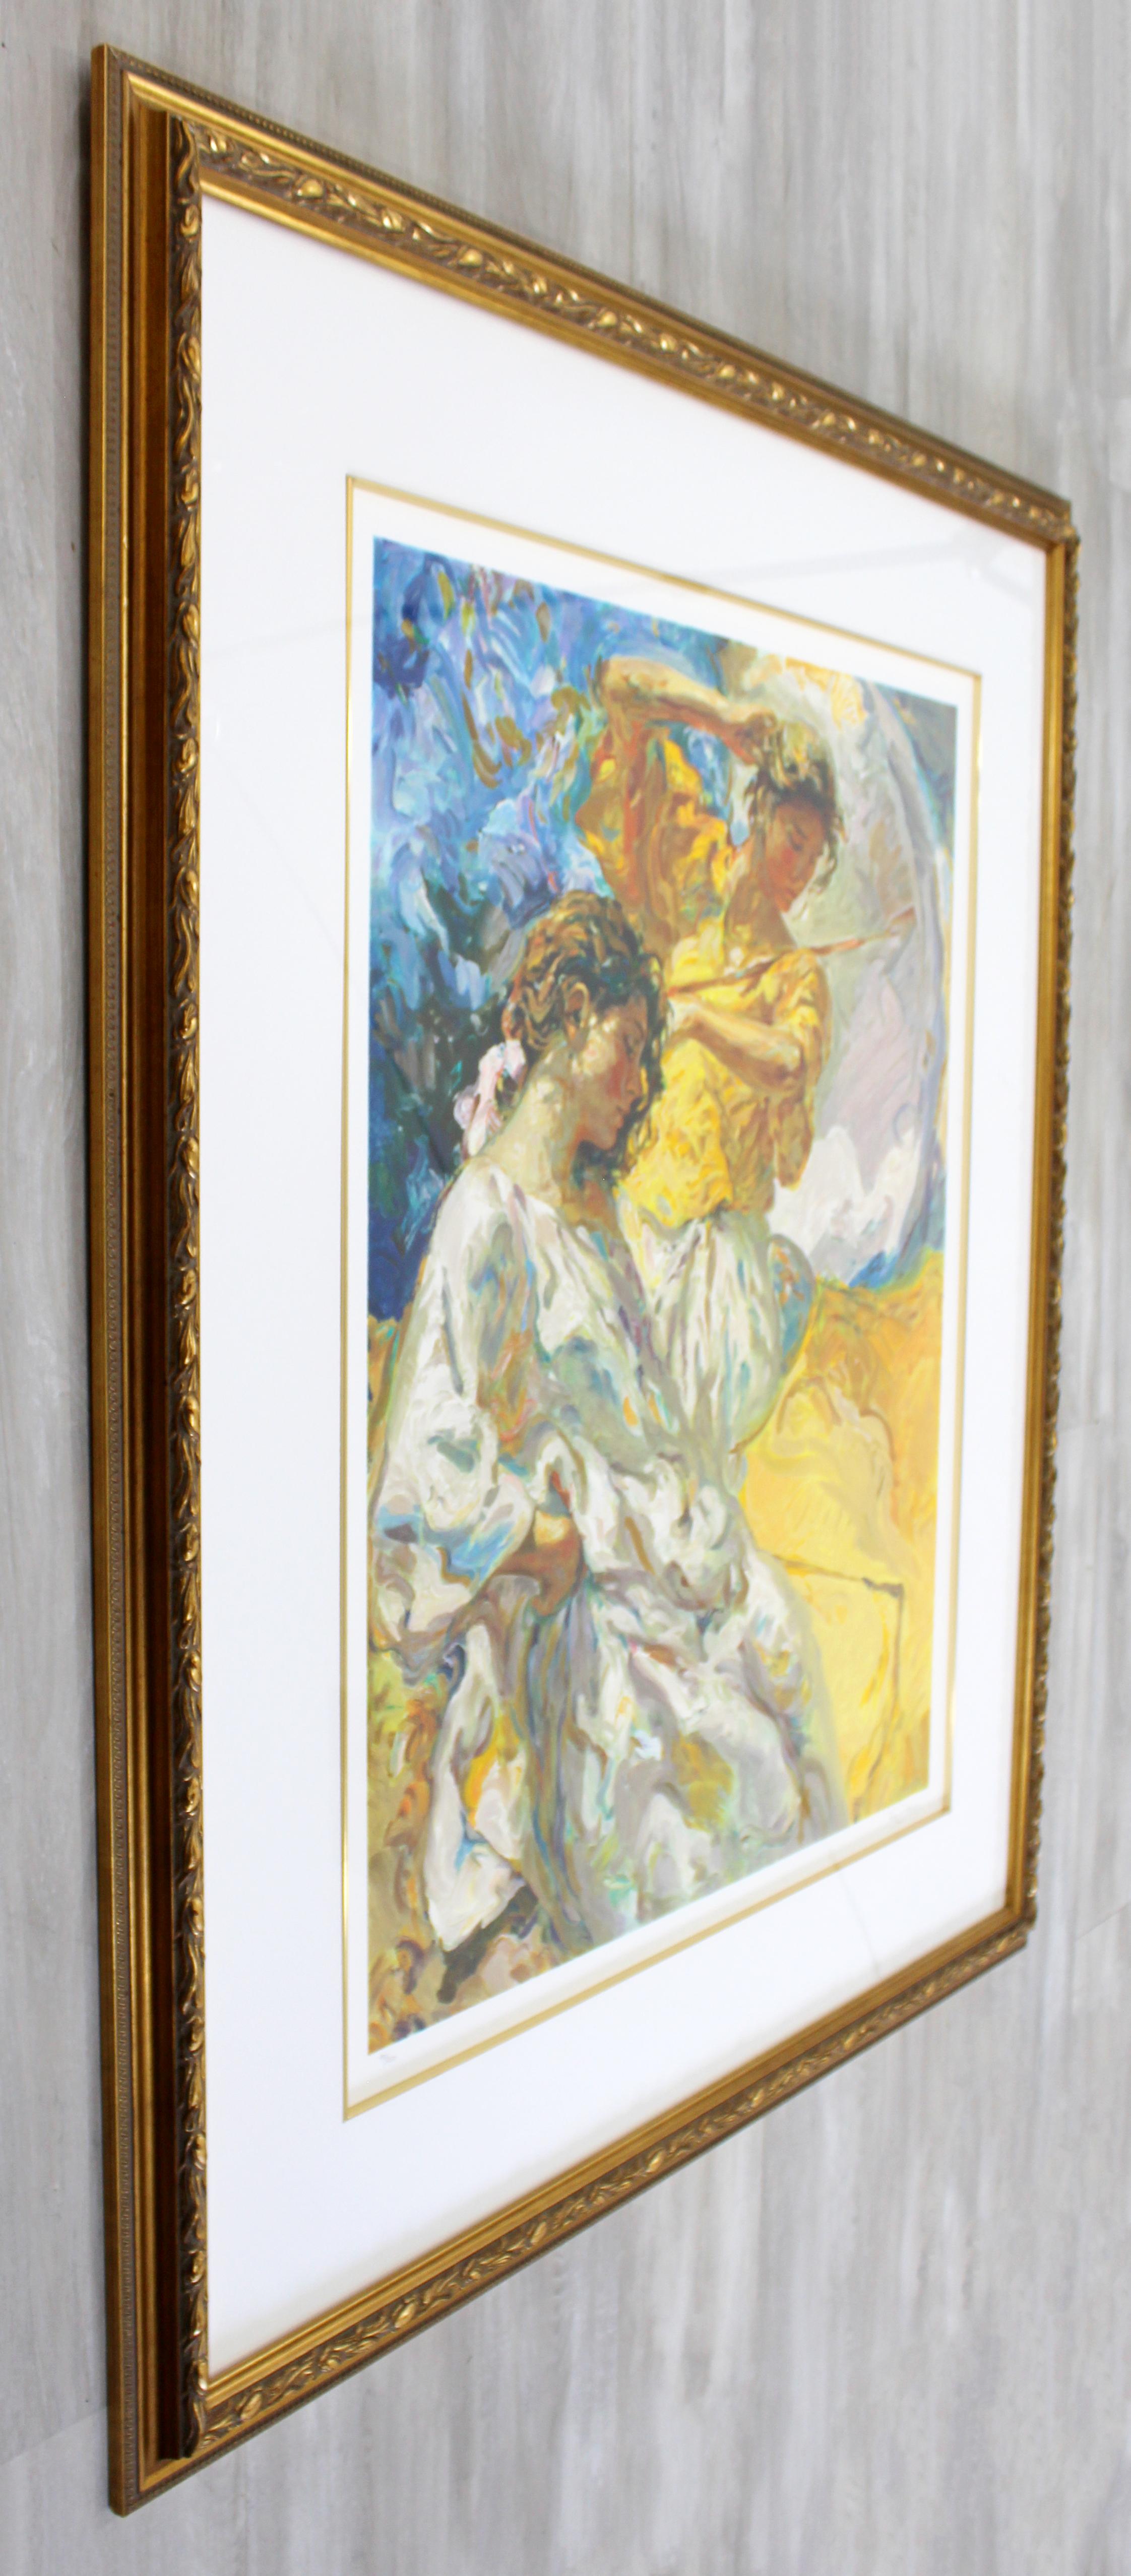 Paper Traditional Framed Jose Royo Signed Serigraph 2 Women Yellow Dress 90/250 For Sale